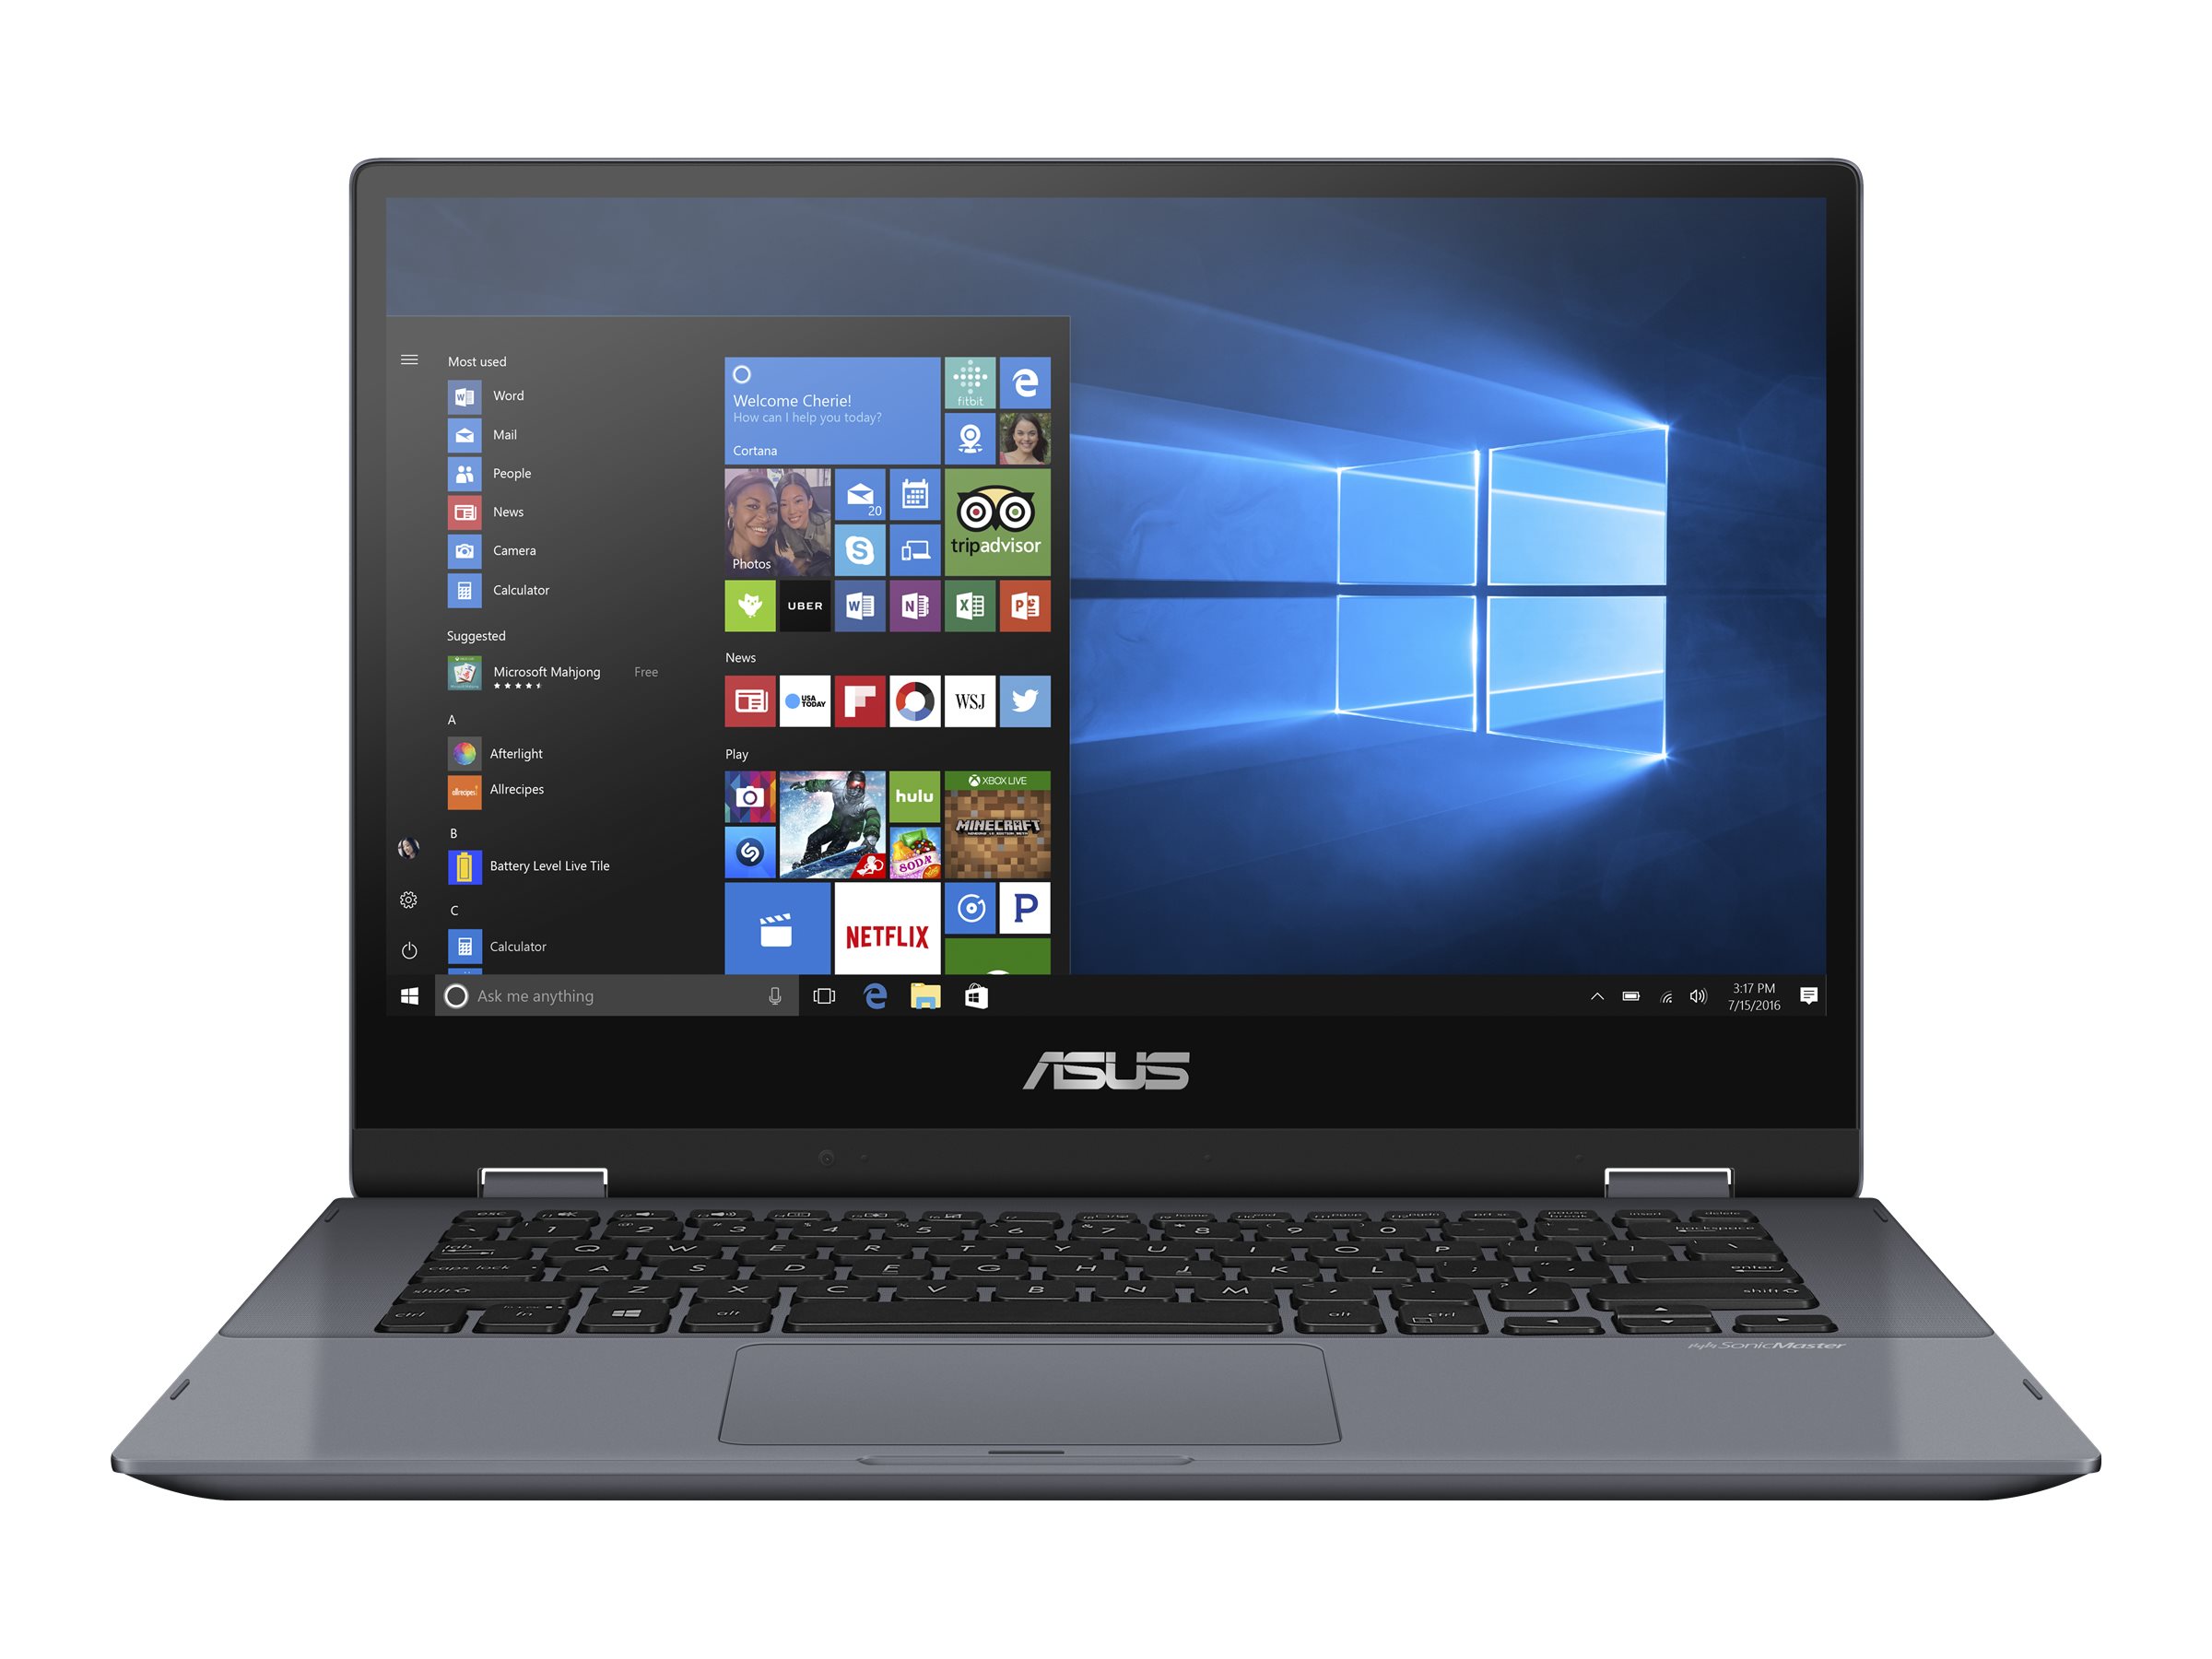 ASUS VivoBook Flip TP412 14" FHD Touch 2-in-1, Intel Core i3-8145U, Intel UHD Graphics 620, 4GB RAM, 128GB SSD, Windows 10 in S Mode, Star Grey, TP412FA-OS31T - image 2 of 14